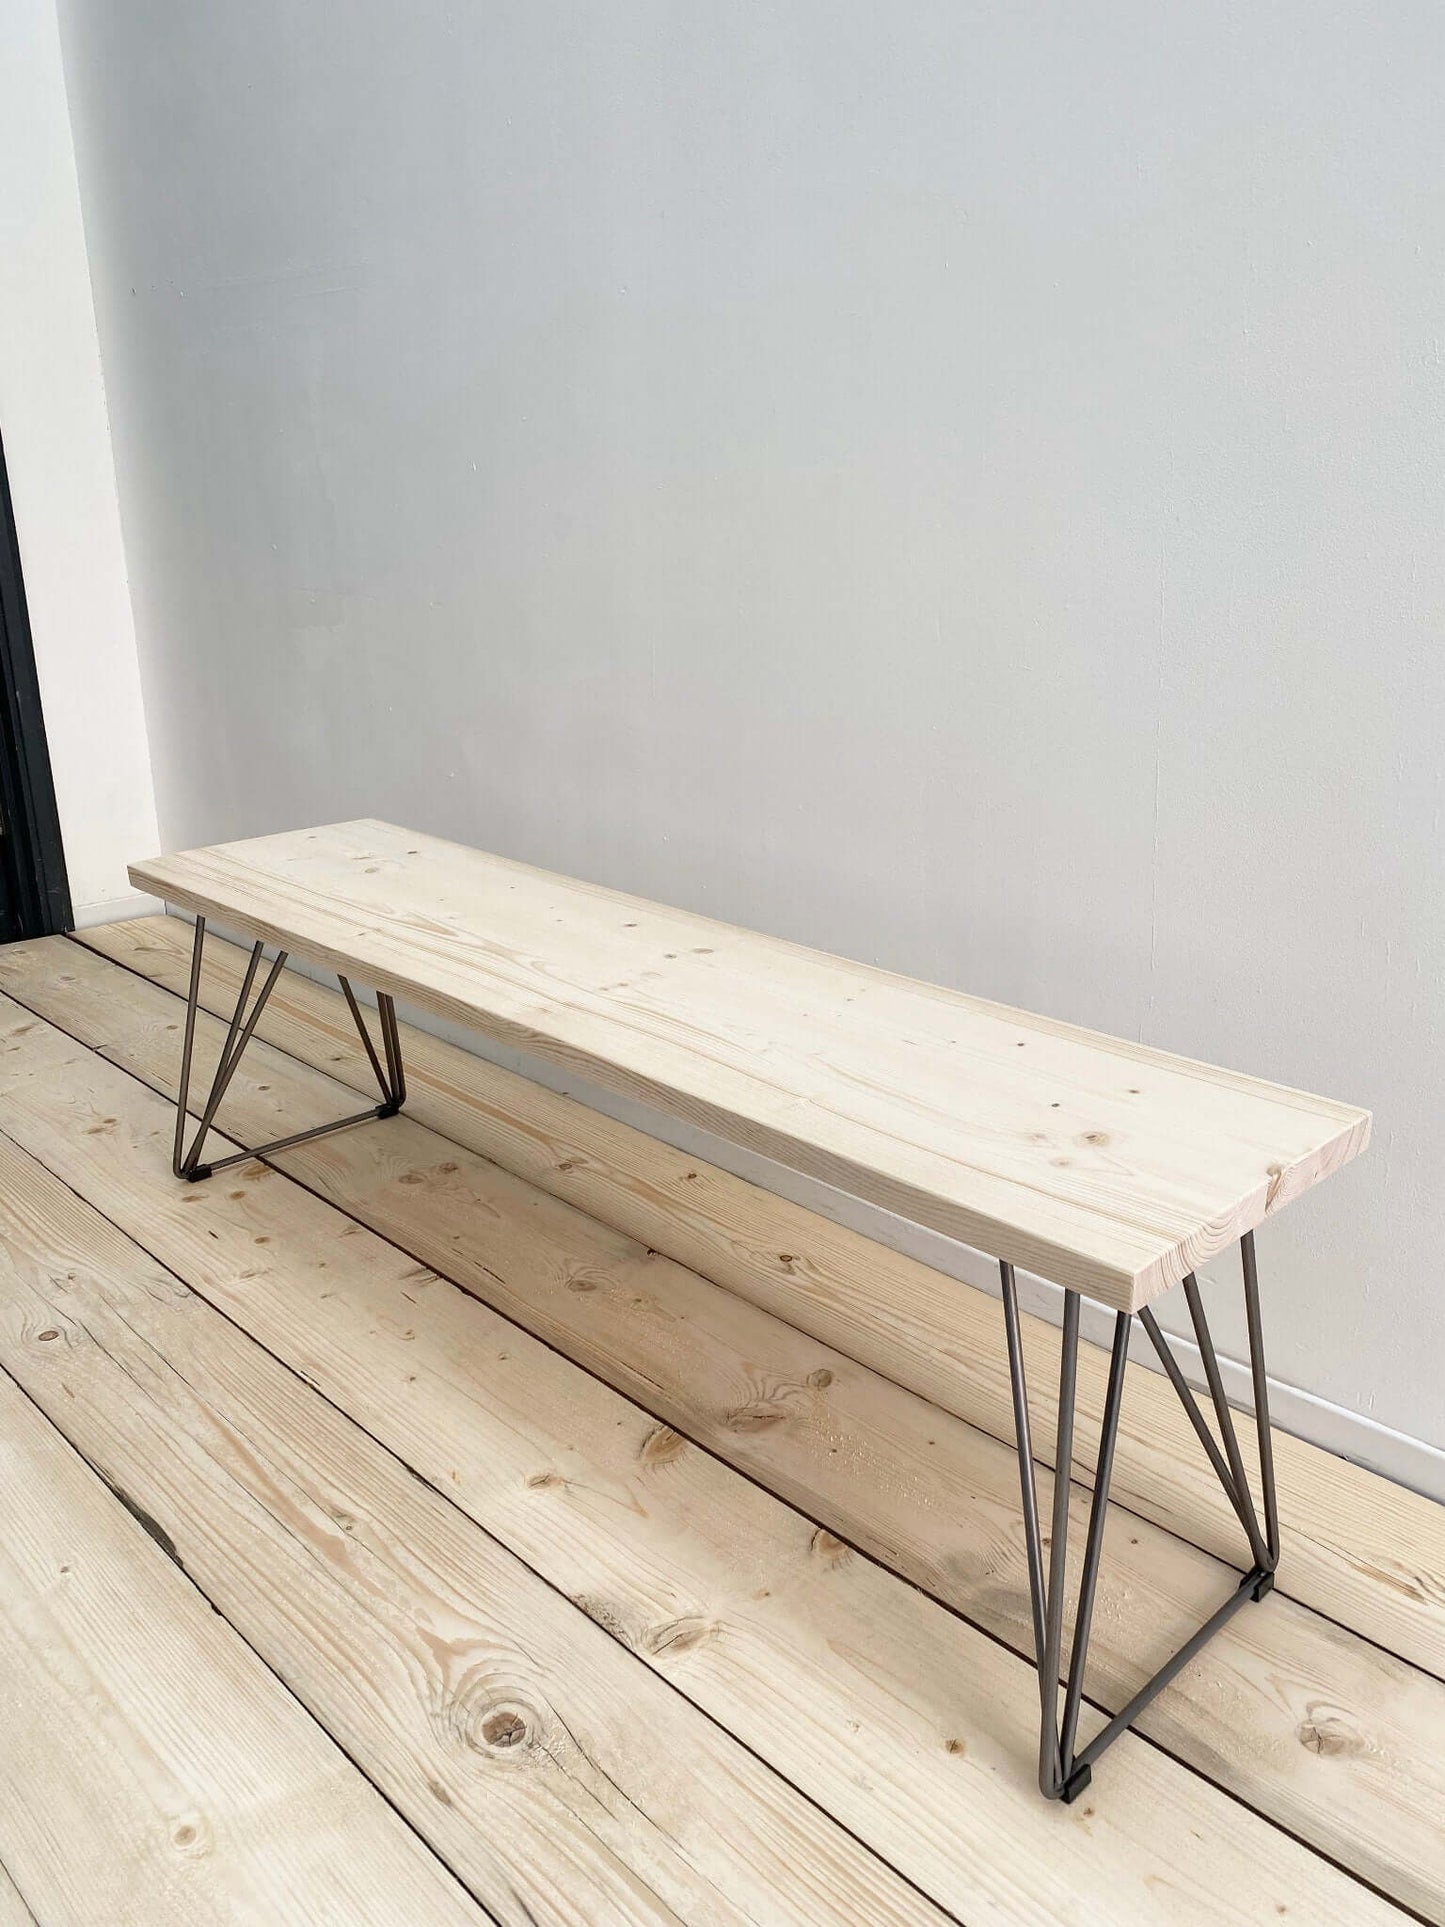 Reclaimed wood outdoor bench with industrial legs.